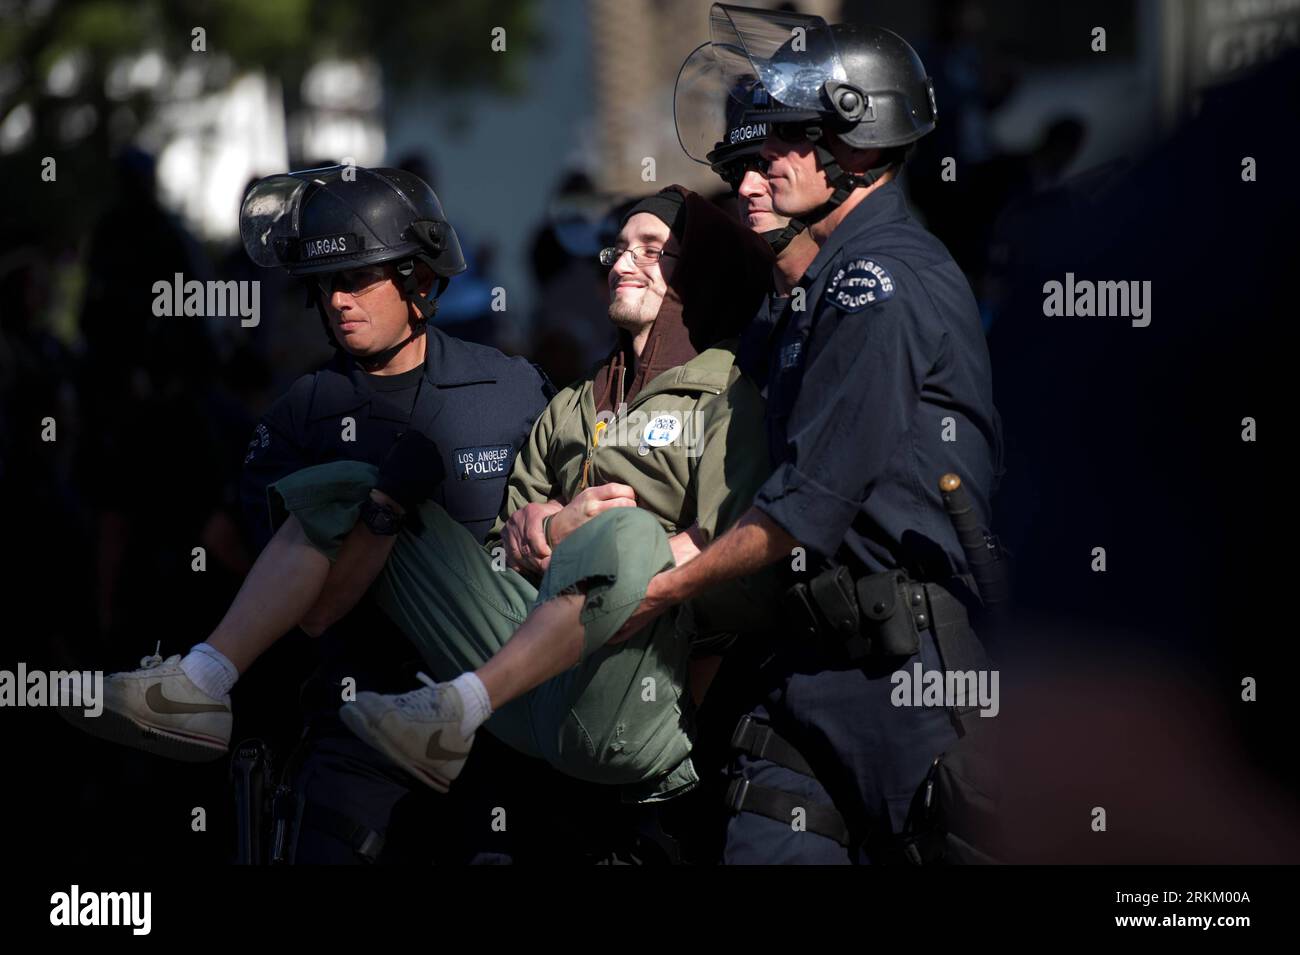 Bildnummer: 56292217  Datum: 17.11.2011  Copyright: imago/Xinhua (111117) -- LOS ANGELES, Nov. 17, 2011 (Xinhua) -- Policemen arrest a protestor in downtown Los Angeles, the United States, Nov. 17, 2011. The anti-Wall Street demonstration in the heart of the downtown Los Angeles financial district on Thursday morning ended after police arrested 23 who were part of those formed a circle and blocked an intersection in the city to show their strong will to tax more on the rich and hold Wall Street accountable for fixing the nation s economy. (Xinhua/Yang Lei) US-ANTI-WALL STREET-DEMONSTRATION PUB Stock Photo